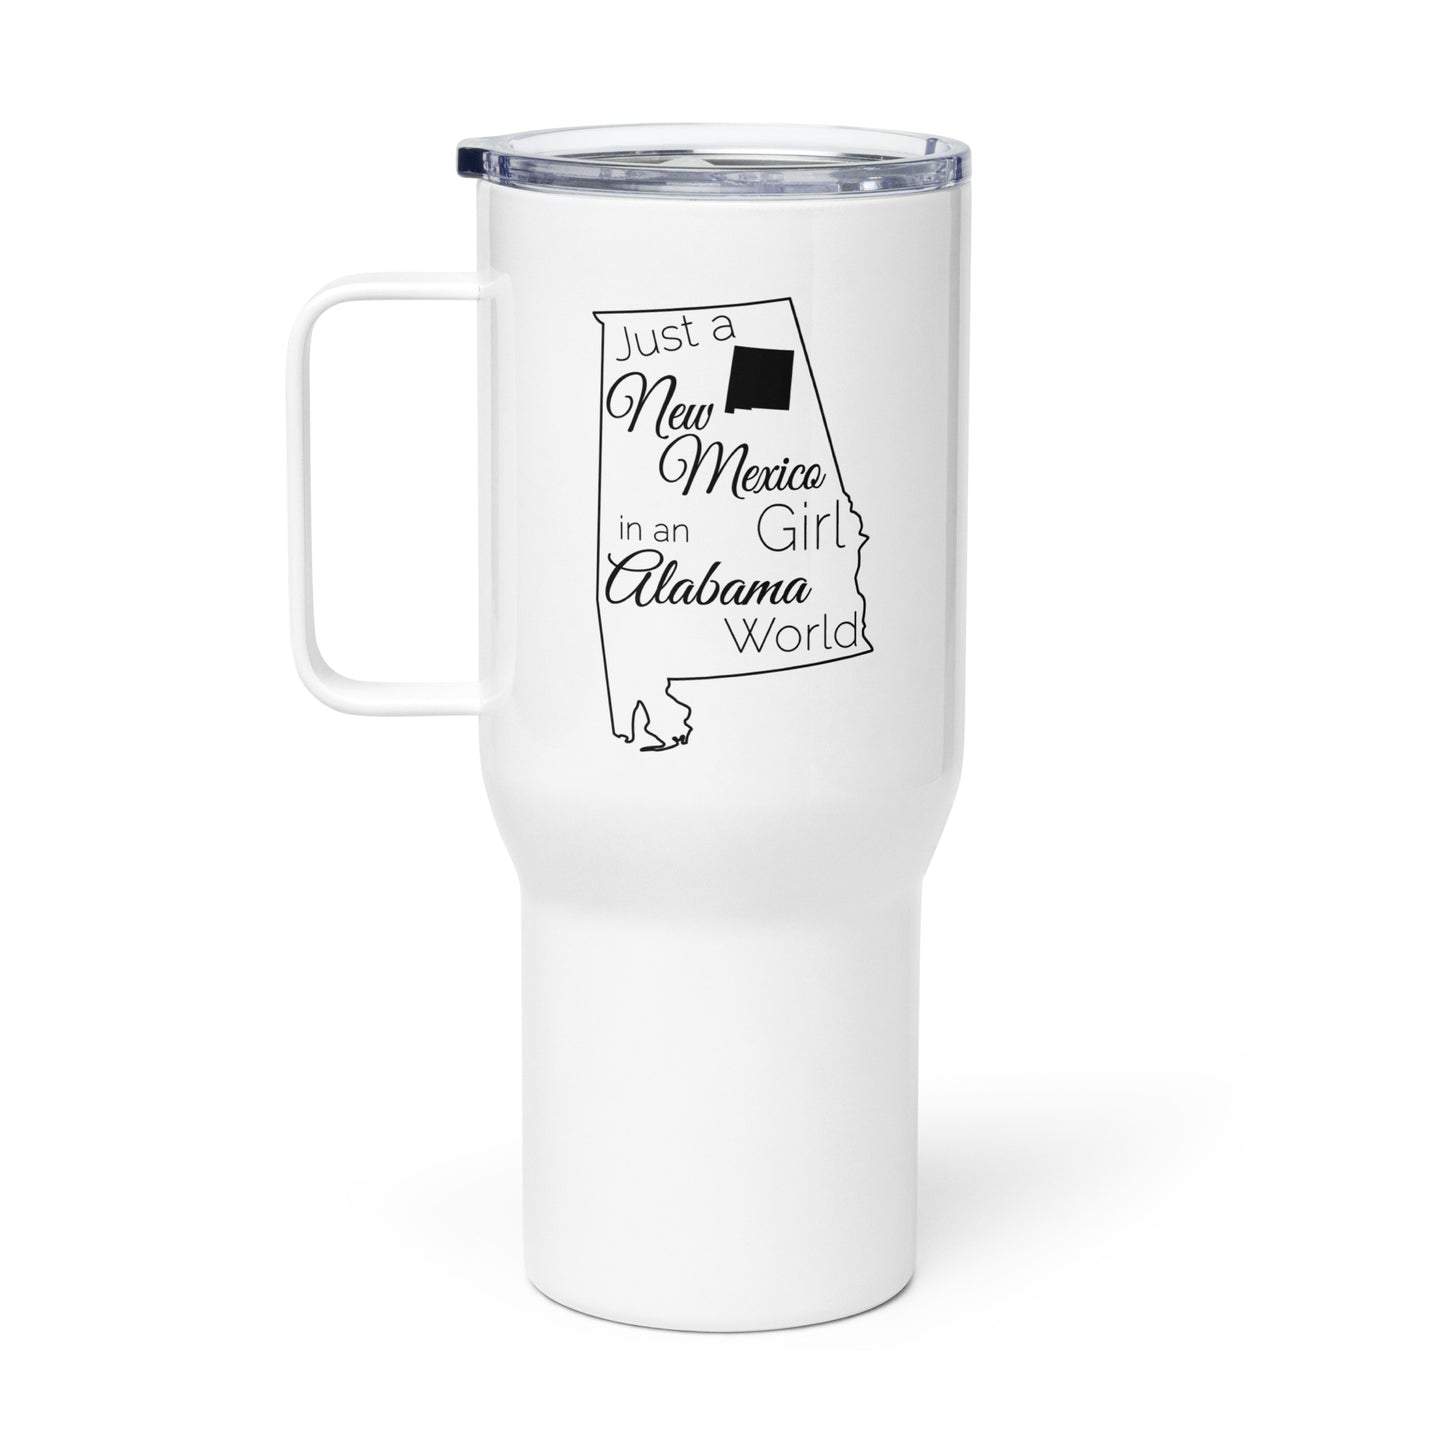 Just a New Mexico Girl in an Alabama World Travel mug with a handle